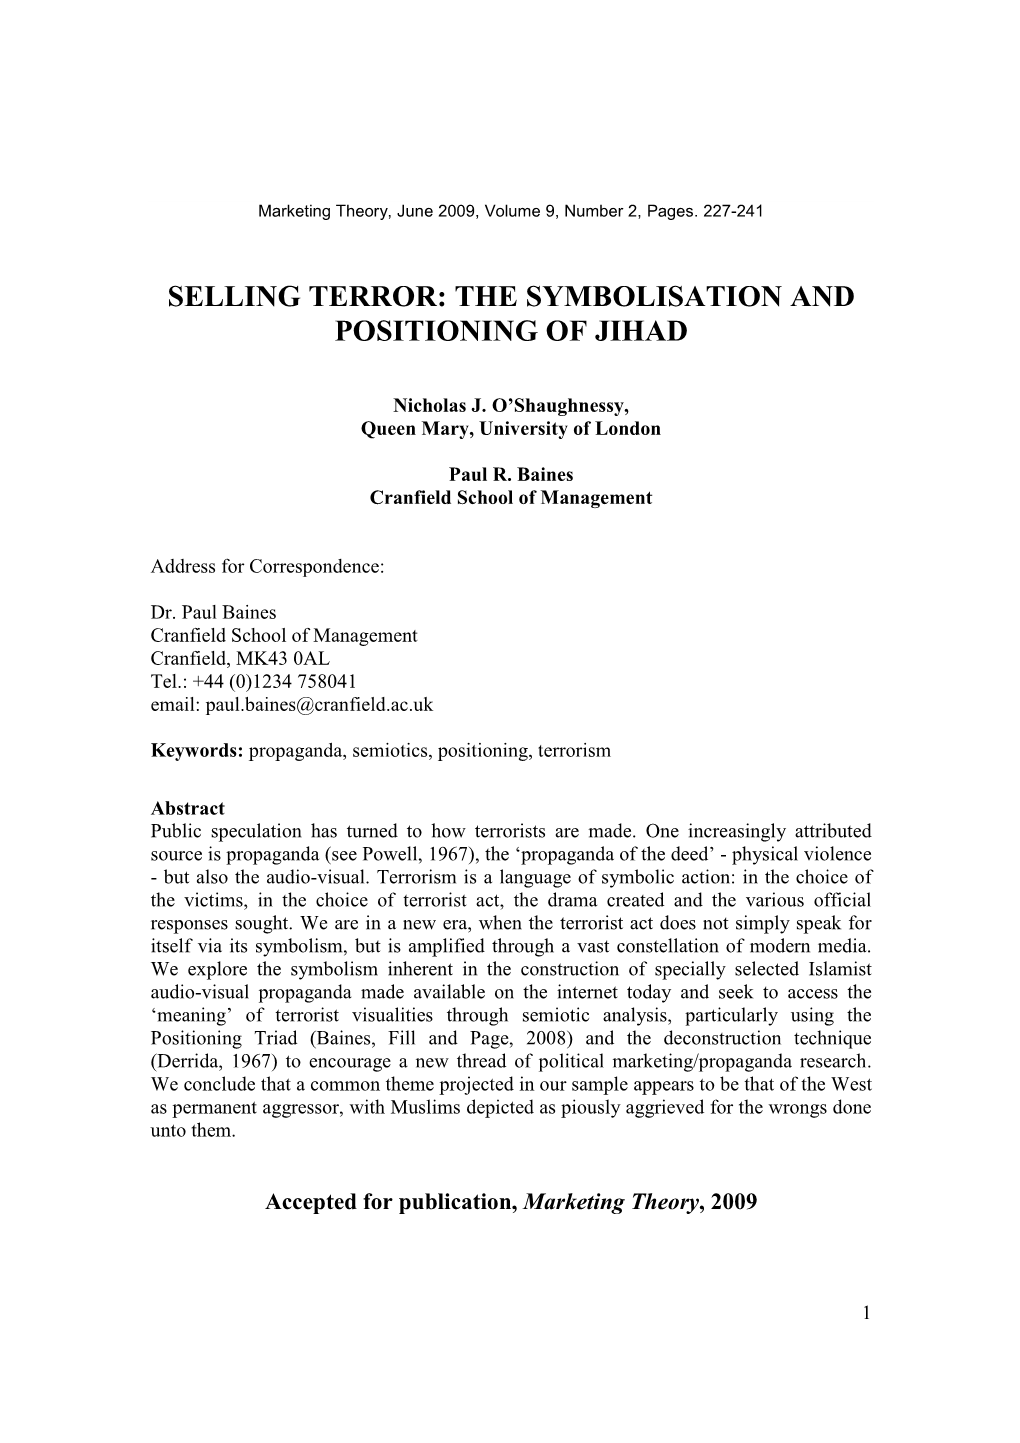 Selling Terror: the Symbolisation and Positioning of Jihad